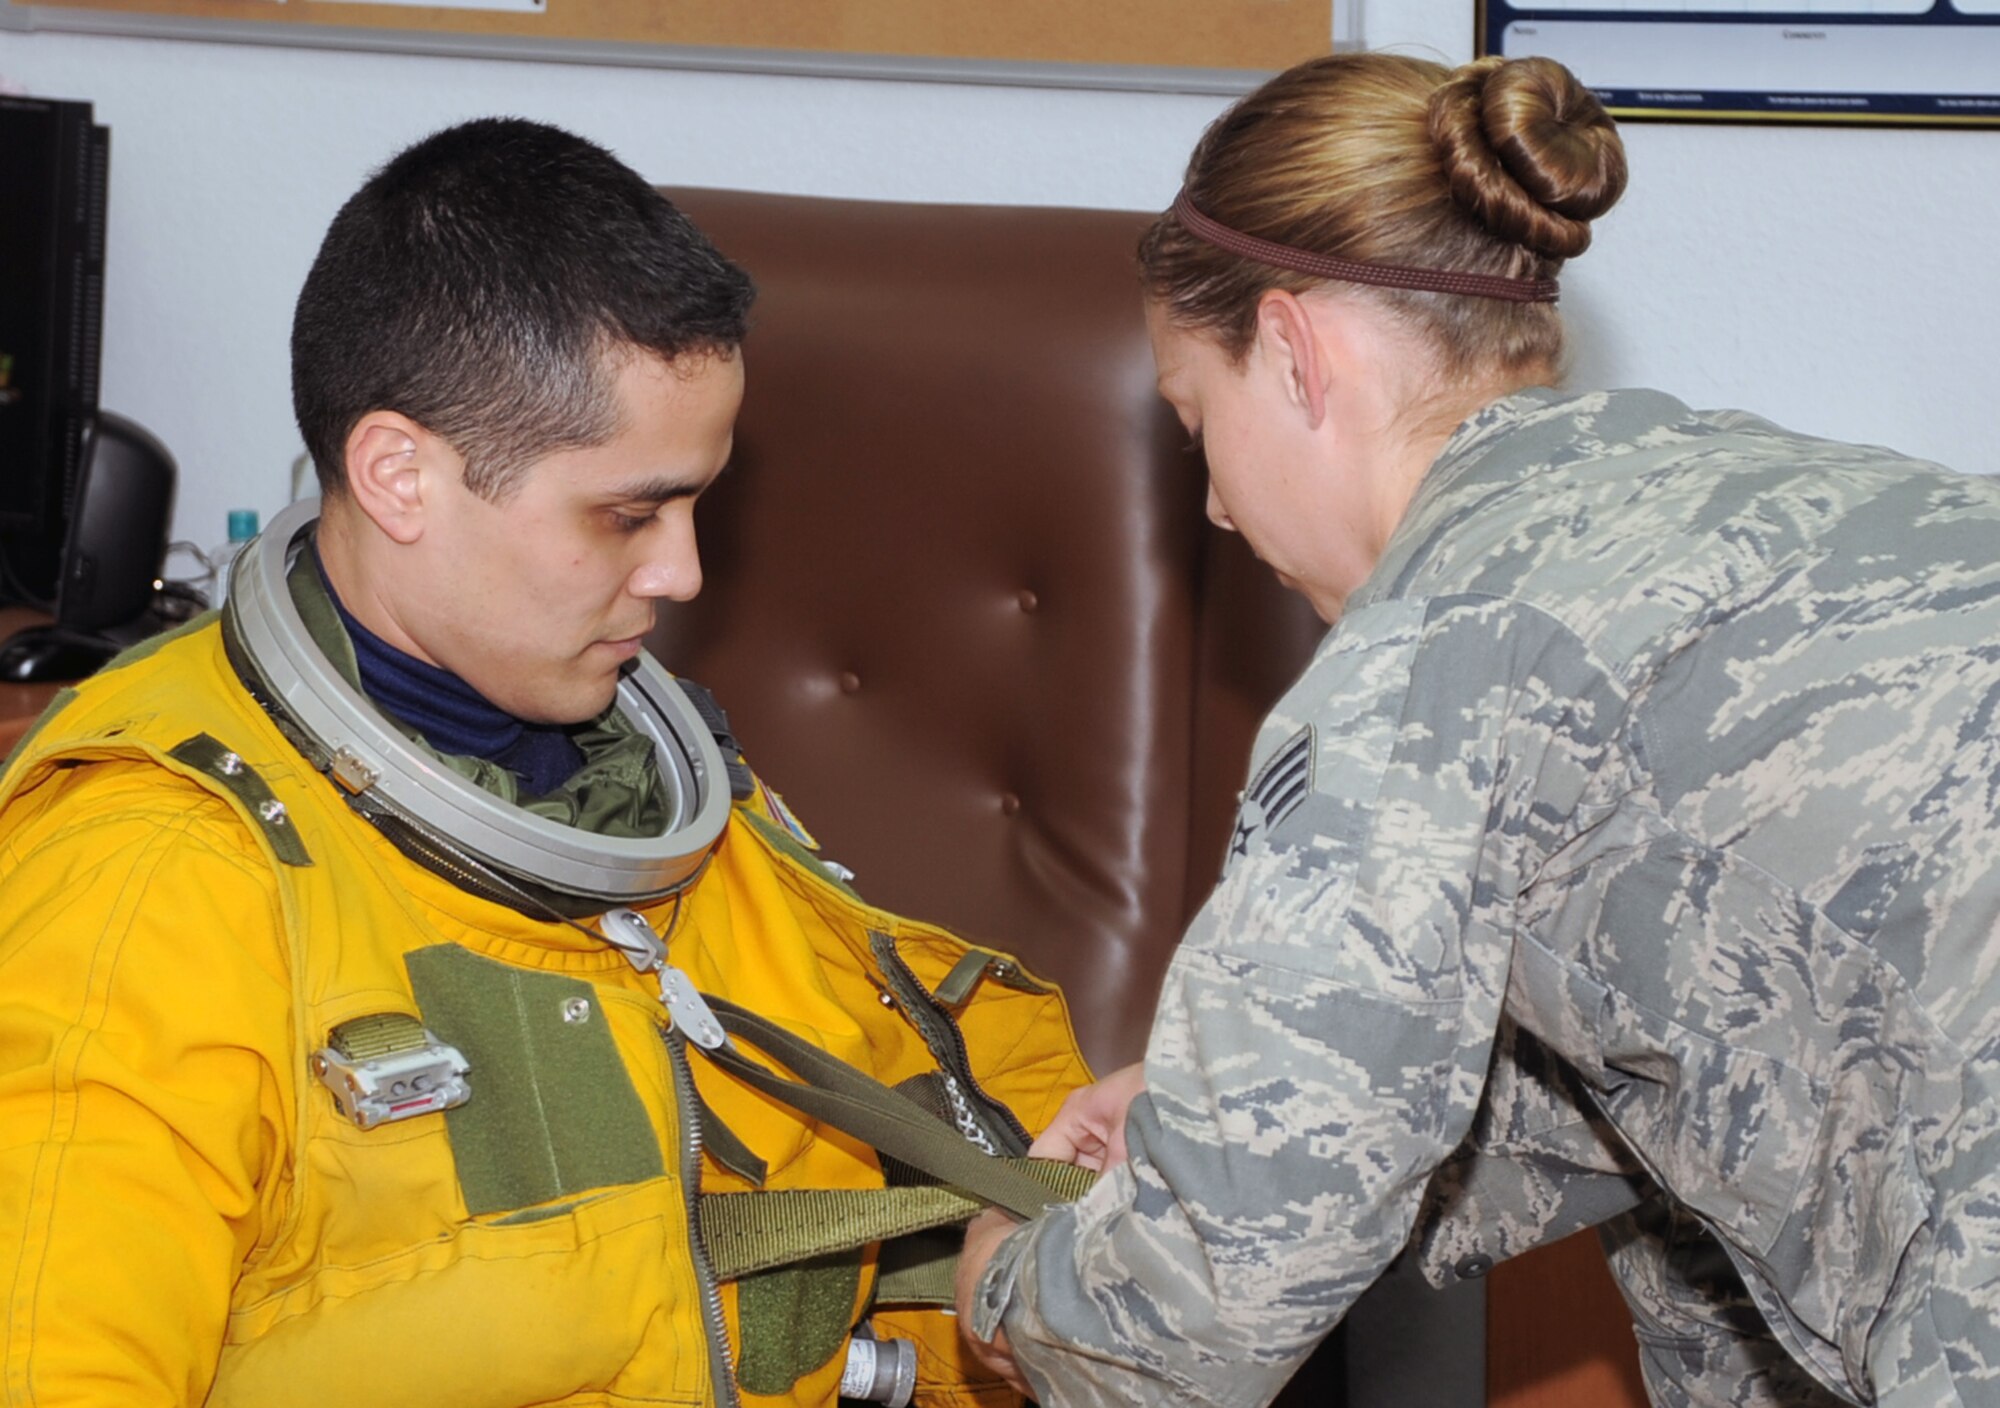 Staff Sgt. Lynnette Keeton, aerospace physiologist with the 99th Expeditionary Reconnaissance Squadron, help gear up Capt. Tony Aponte, U-2 Dragon Lady pilot, before Captain Aponte was to go on a mission on Jan. 23, 2010, at a non-disclosed location in Southwest Asia.  Because the U-2 flies as high an altitude as 70,000 feet, pilots are required to wear a special suit to complete their mission.  The 99th ERS, part of the 380th Air Expeditionary Wing, supports Operations Iraqi Freedom and Enduring Freedom and the Combined Joint Task Force-Horn of Africa. (U.S. Air Force Photo/Tech. Sgt. Scott T. Sturkol/Released)